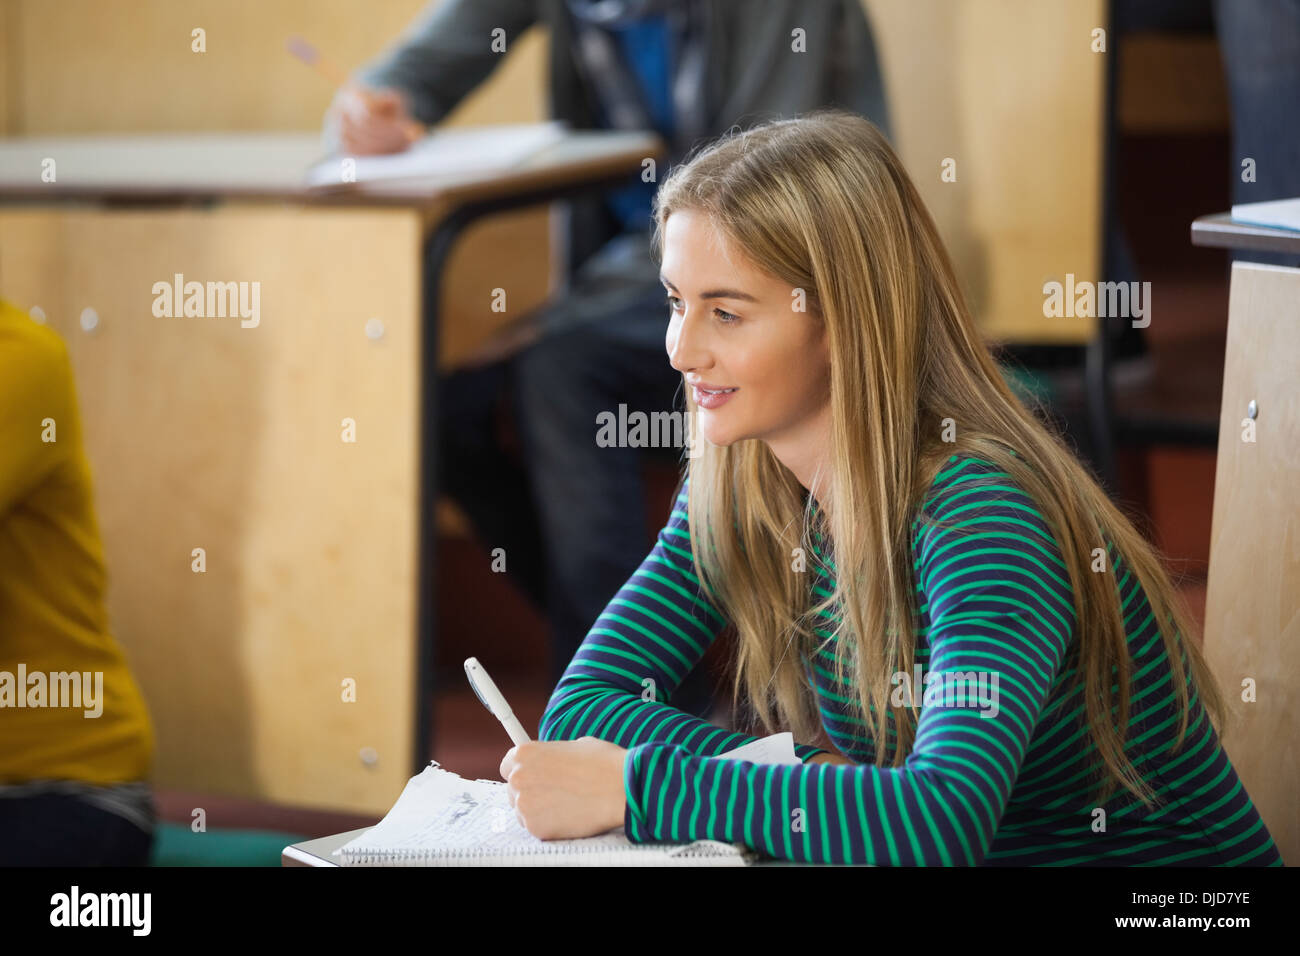 Smiling blonde student taking notes in a lecture hall Stock Photo